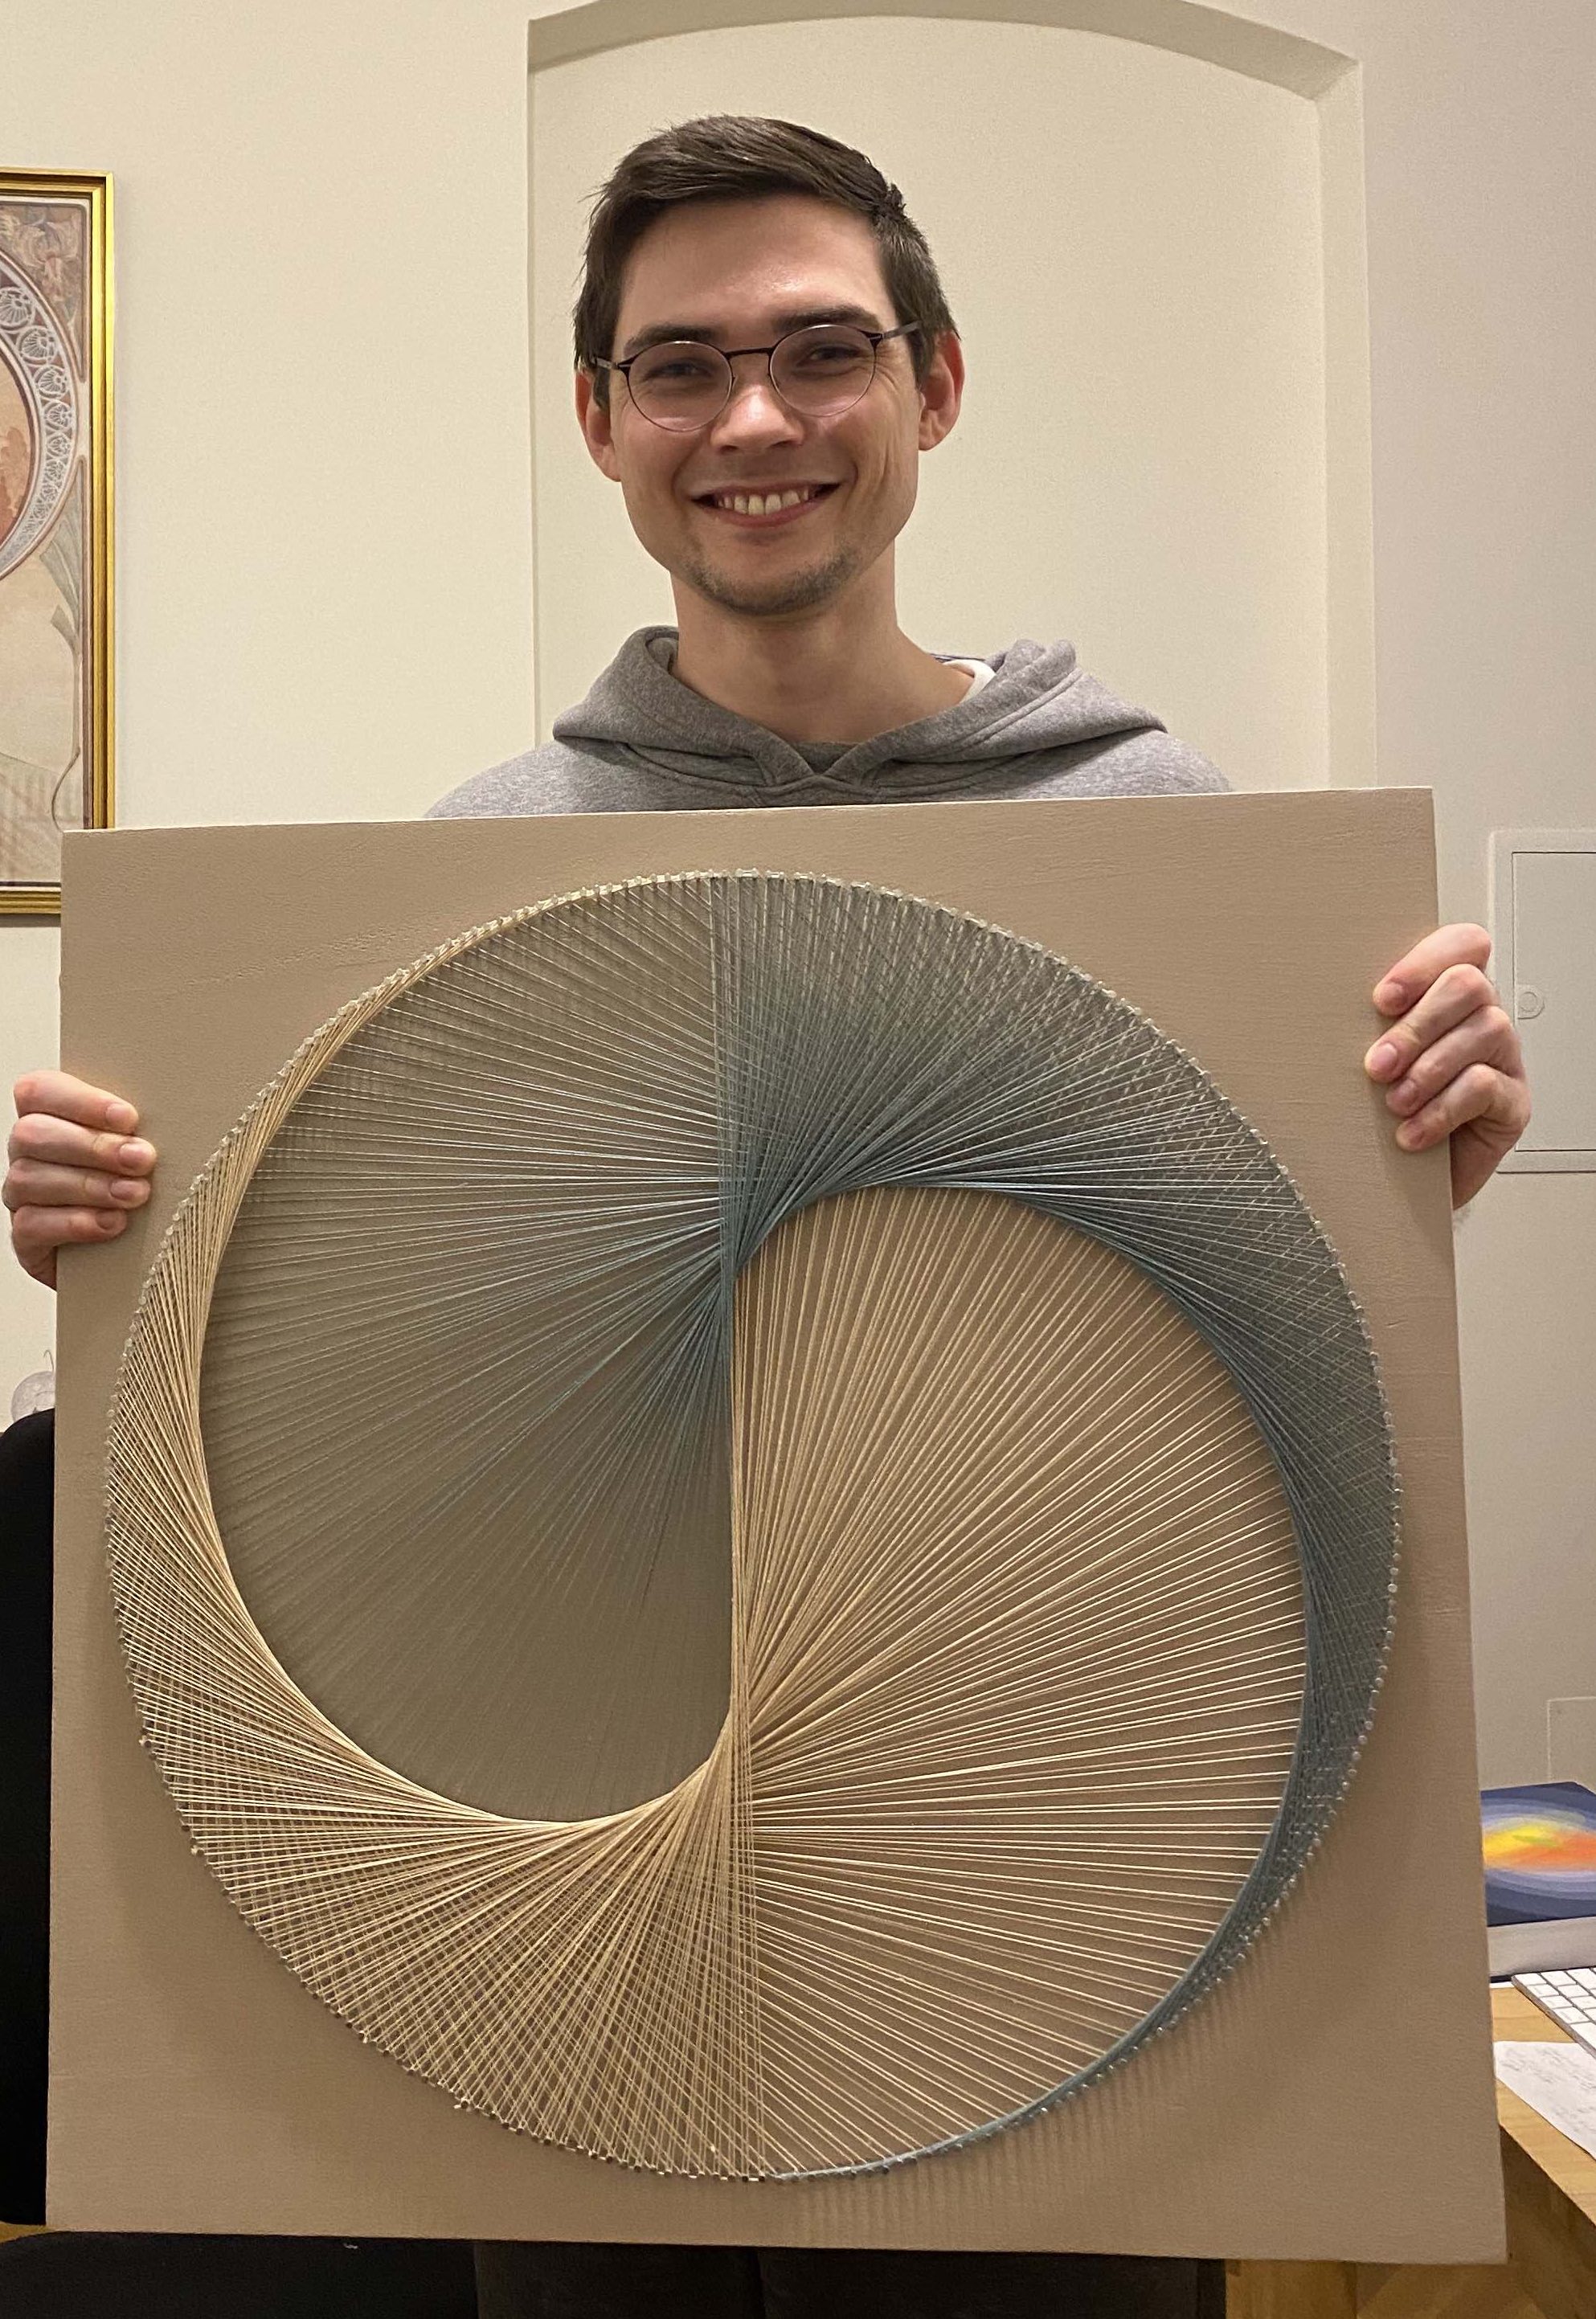 picture of myself and final string art piece